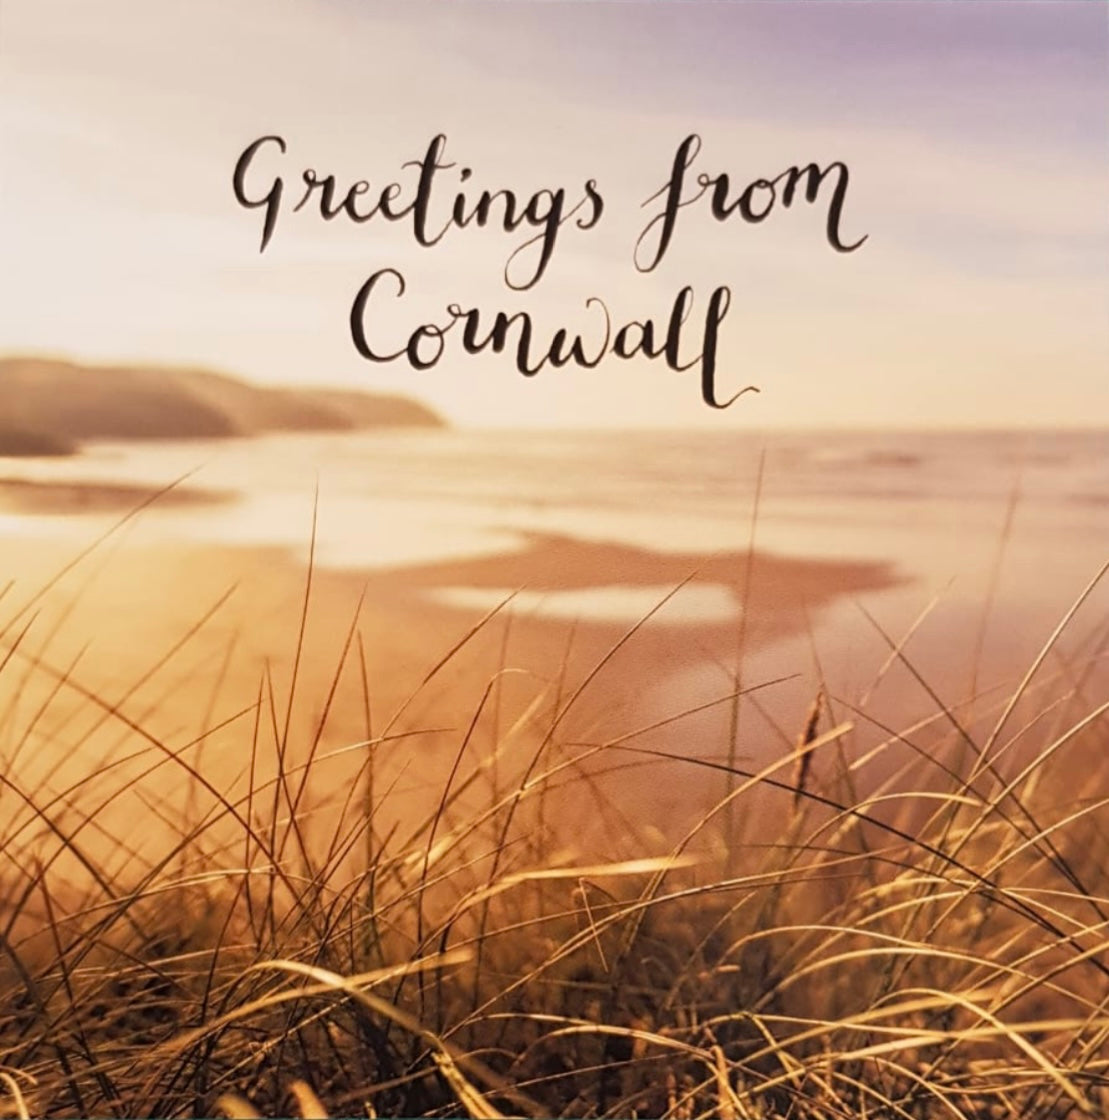 Greetings From Cornwall - card